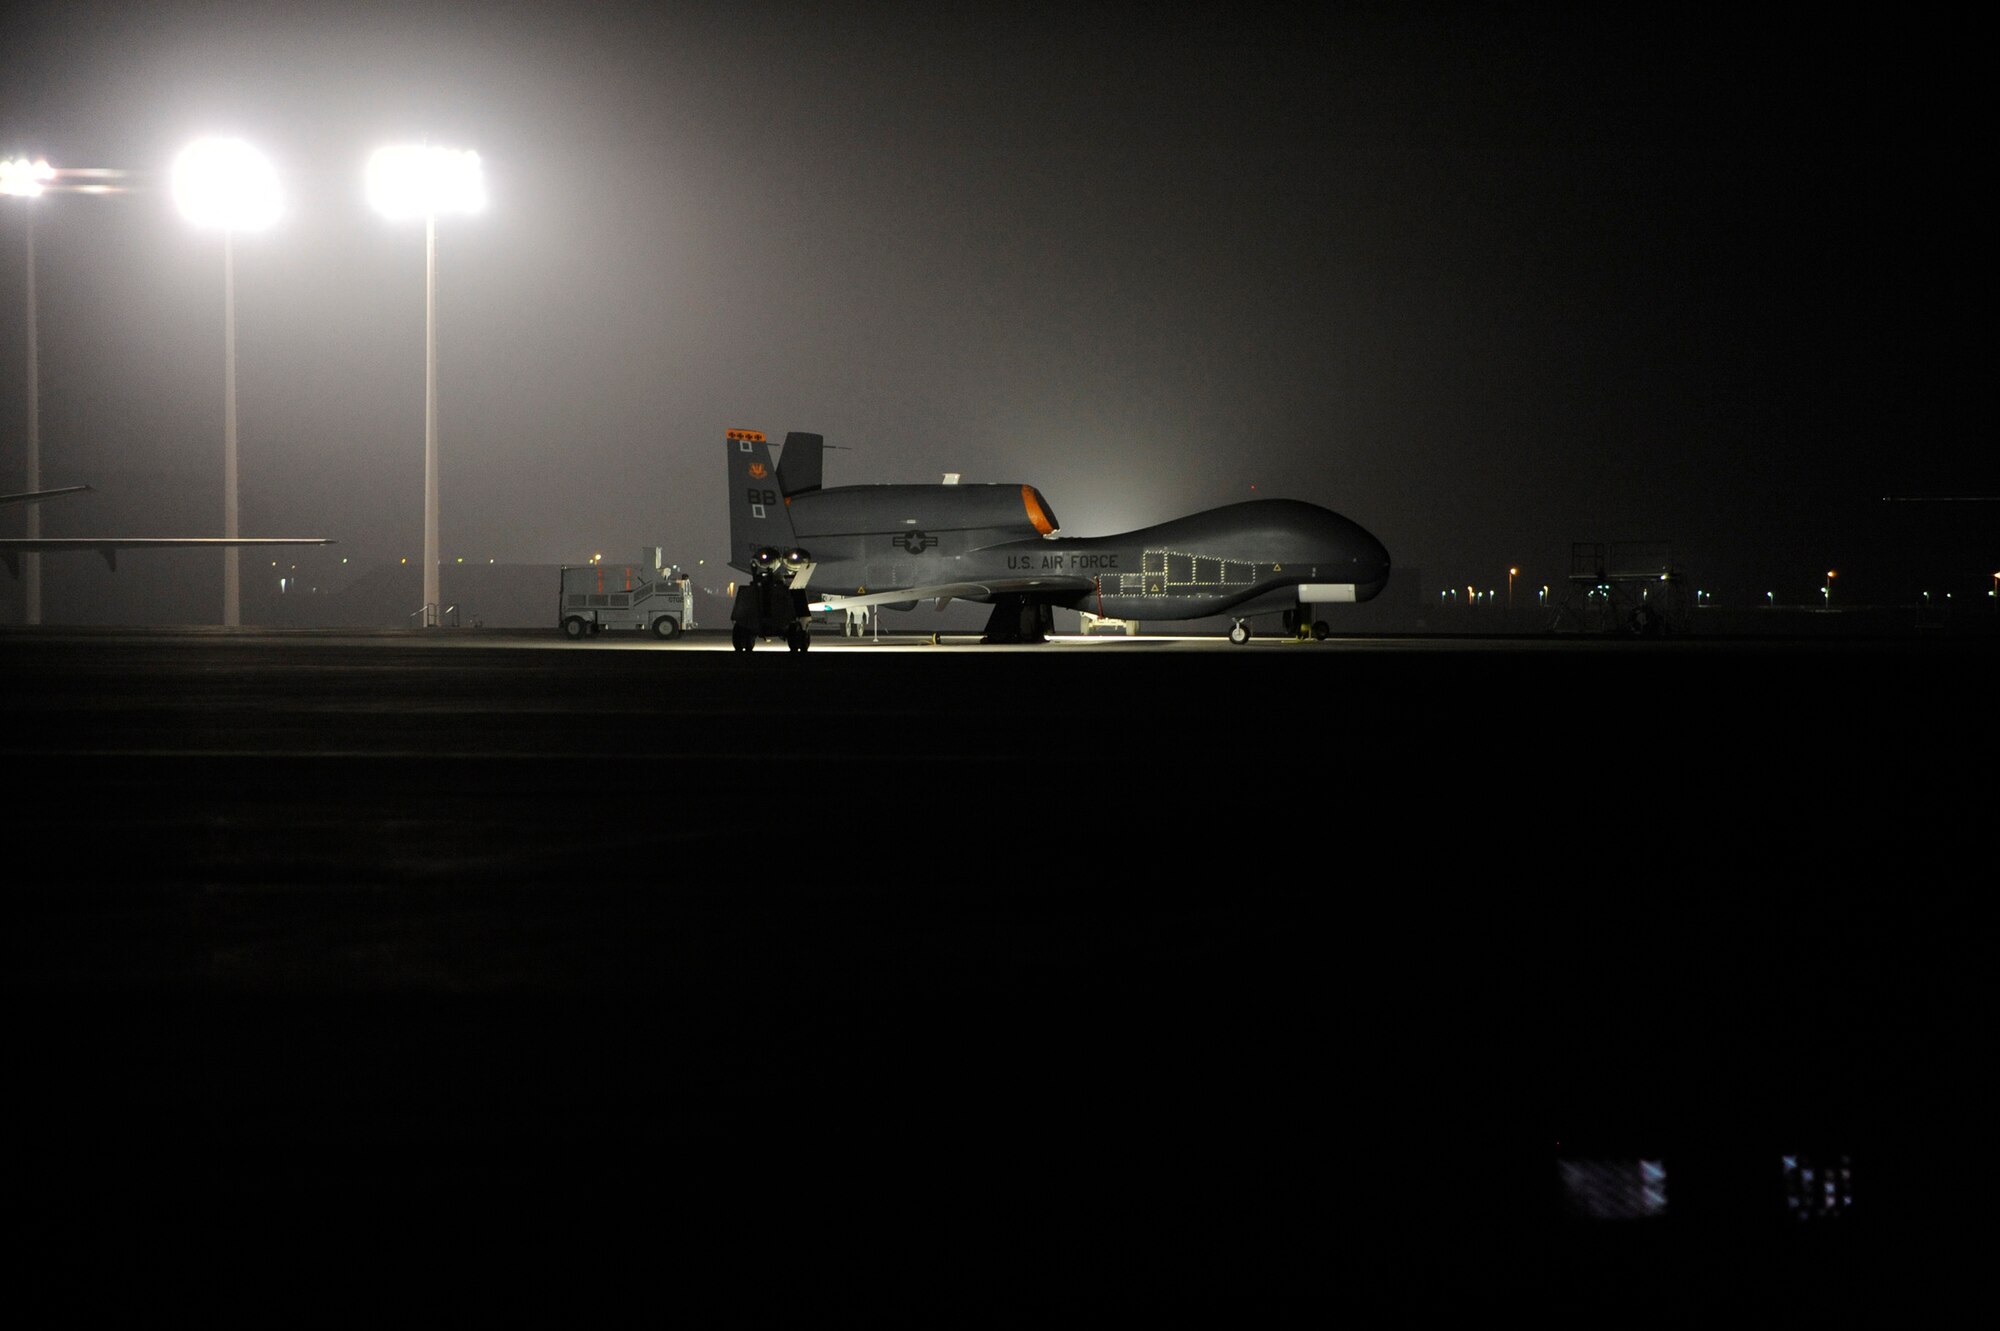 SOUTHWEST ASIA -  An RQ-4 Global Hawk stands ready on the flightline of the 380th Air Expeditionary Wing, Mar 24. The 380th AEW flies refueling and reconnaissance missions 24/7 in support of Operations Iraqi and Enduring Freedom and Joint Task Force Horn of Africa. (U.S. Air Force photo by Senior Airman Brian J. Ellis) (Released)